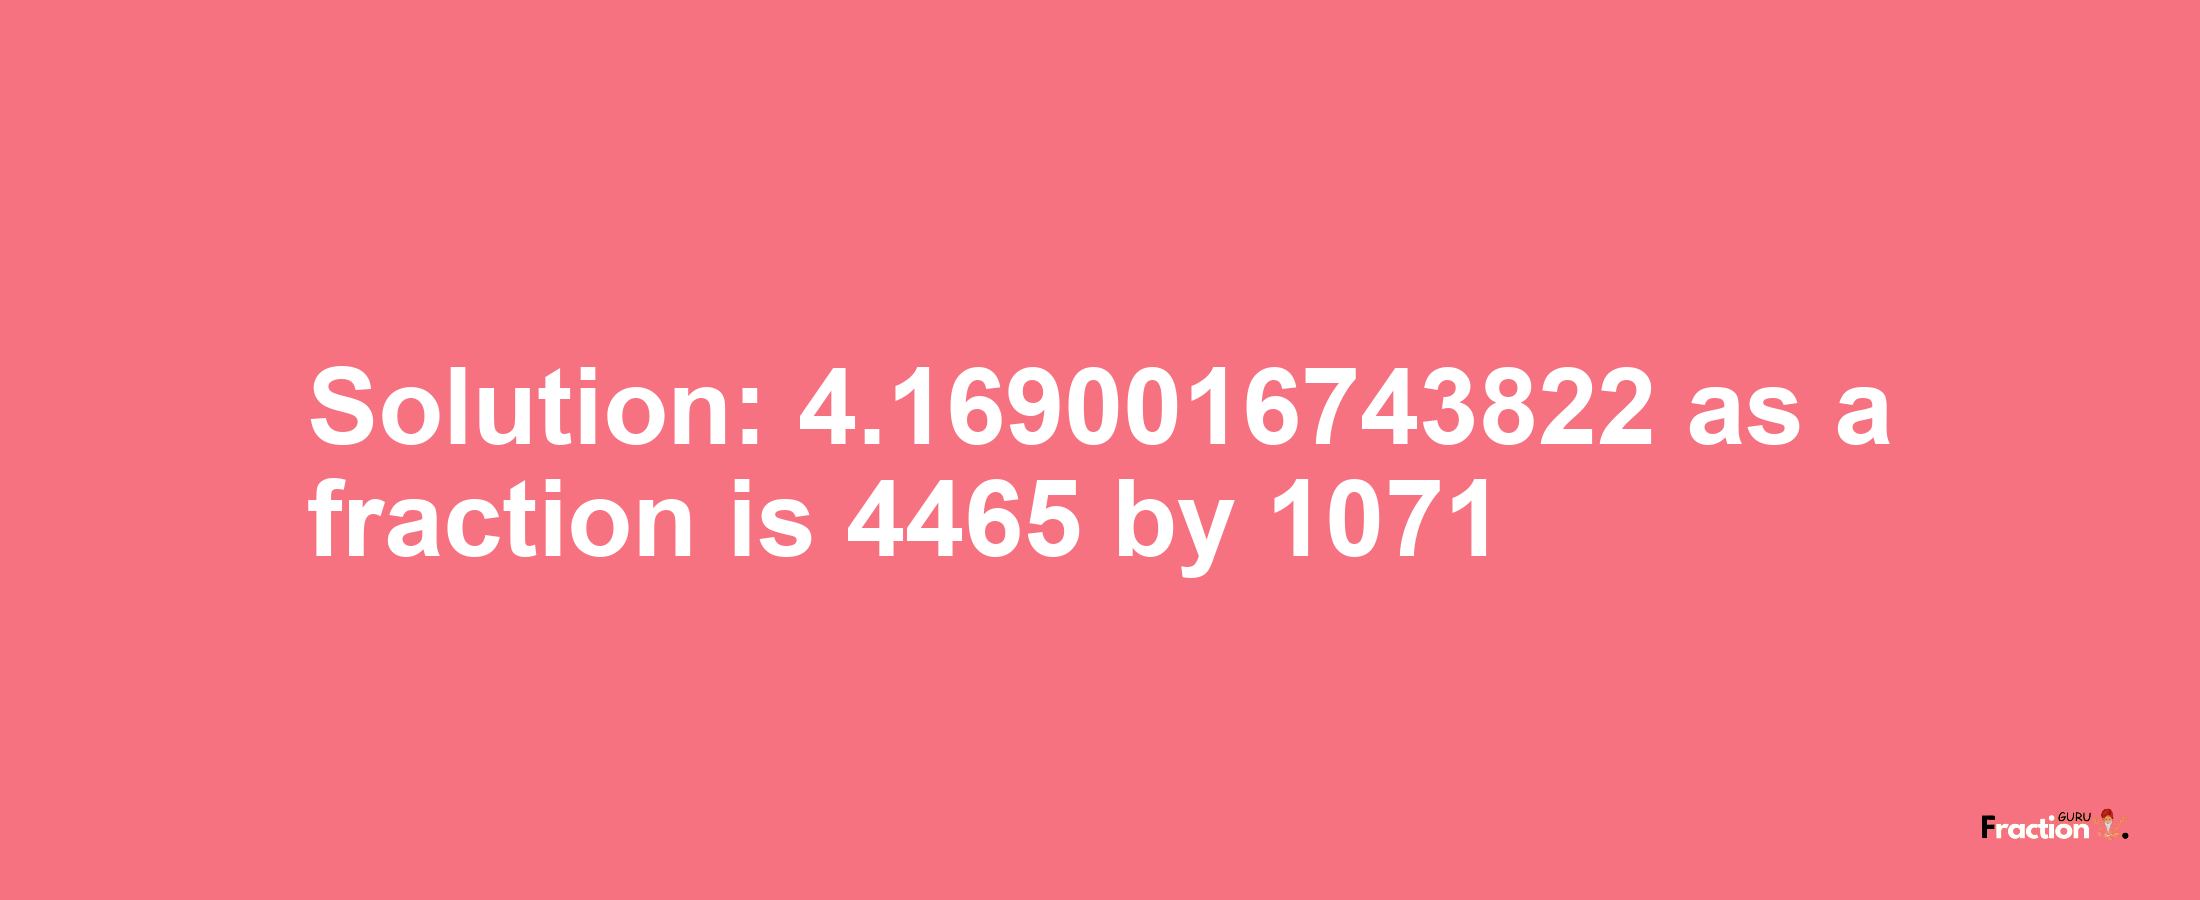 Solution:4.1690016743822 as a fraction is 4465/1071